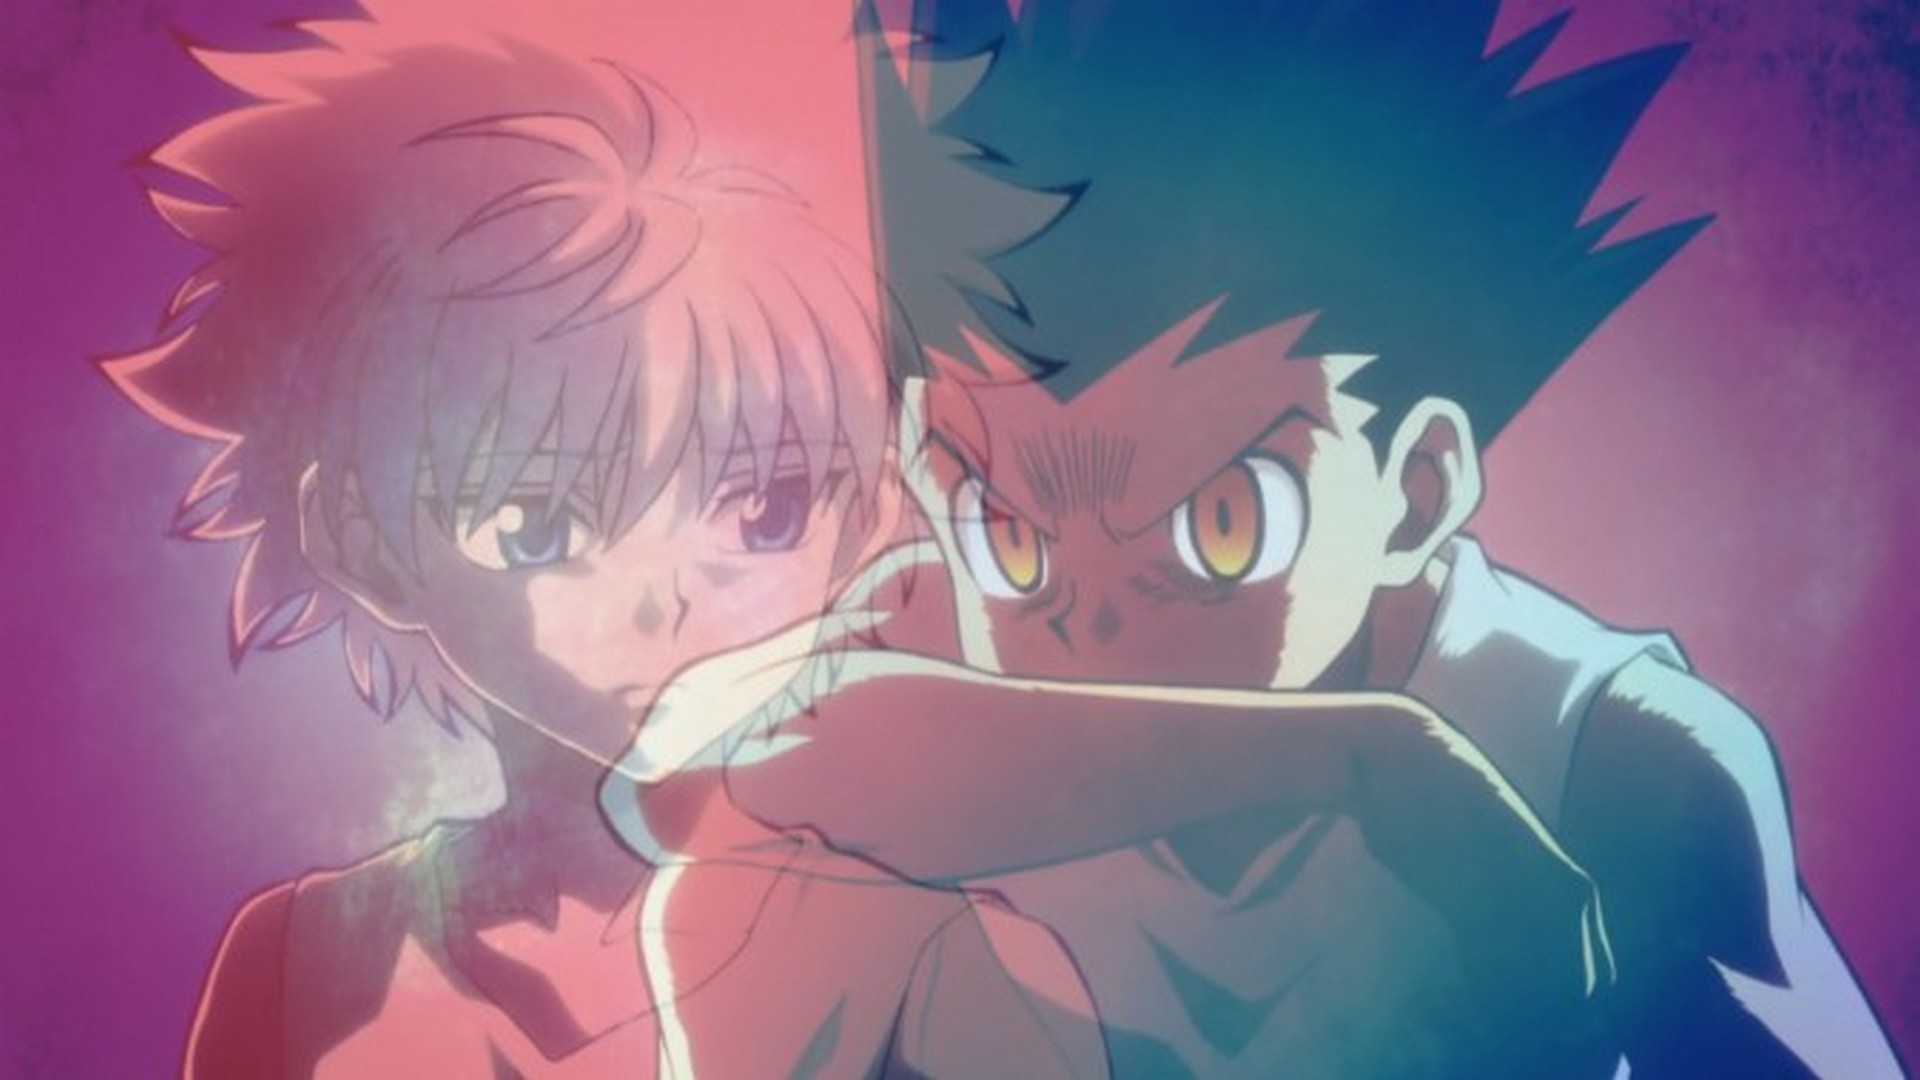 HD Wallpaper Gon And Killua With high-resolution 1920X1080 pixel. You can use this wallpaper for your Desktop Computer Backgrounds, Mac Wallpapers, Android Lock screen or iPhone Screensavers and another smartphone device